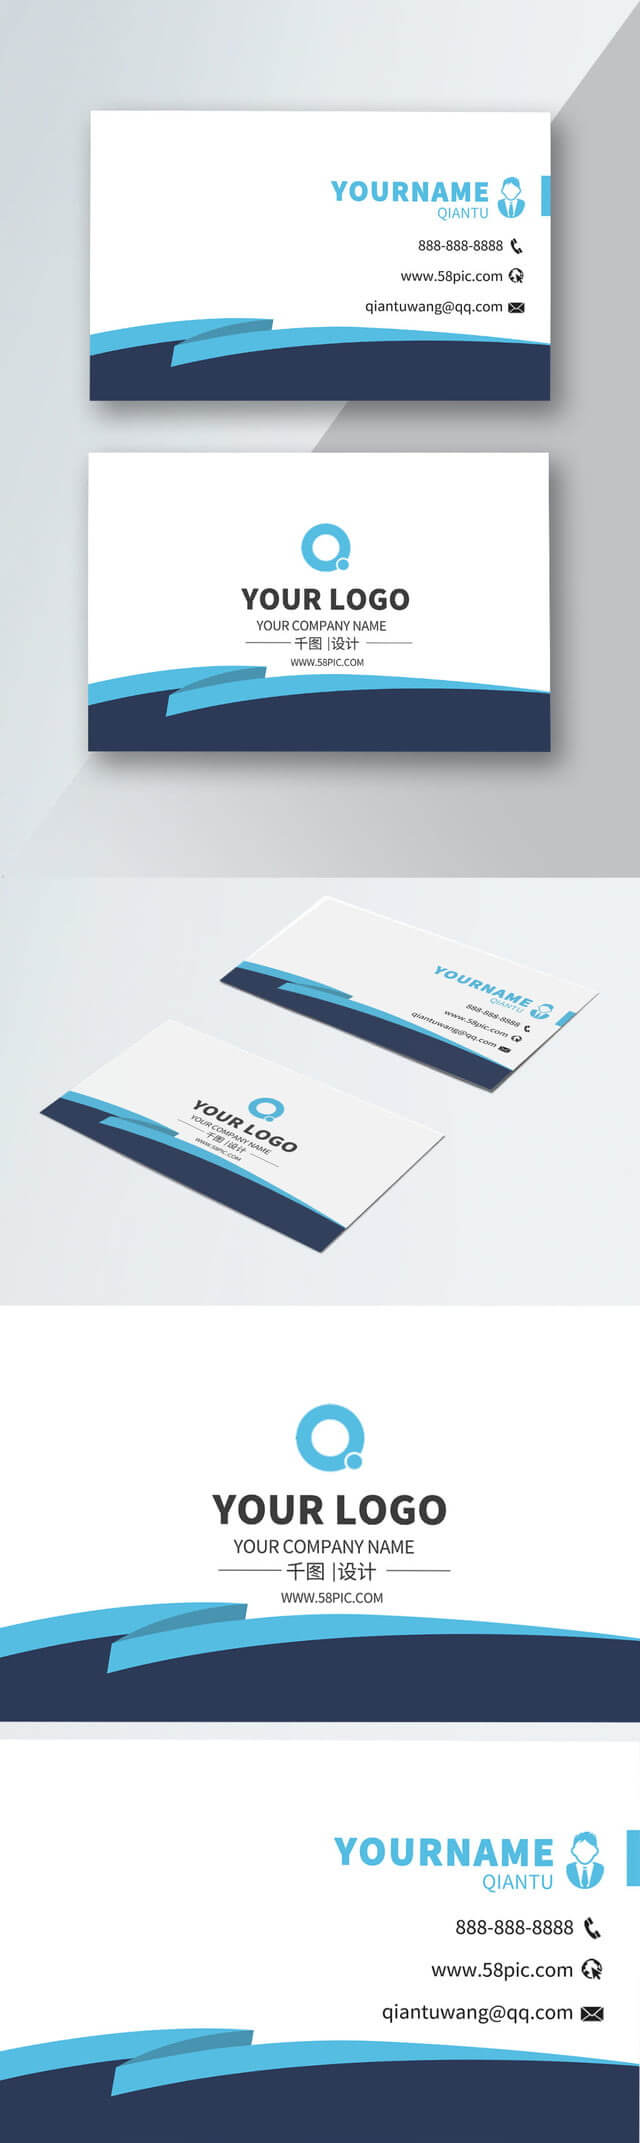 Advertising Company Business Card Material Download Regarding Company Business Cards Templates